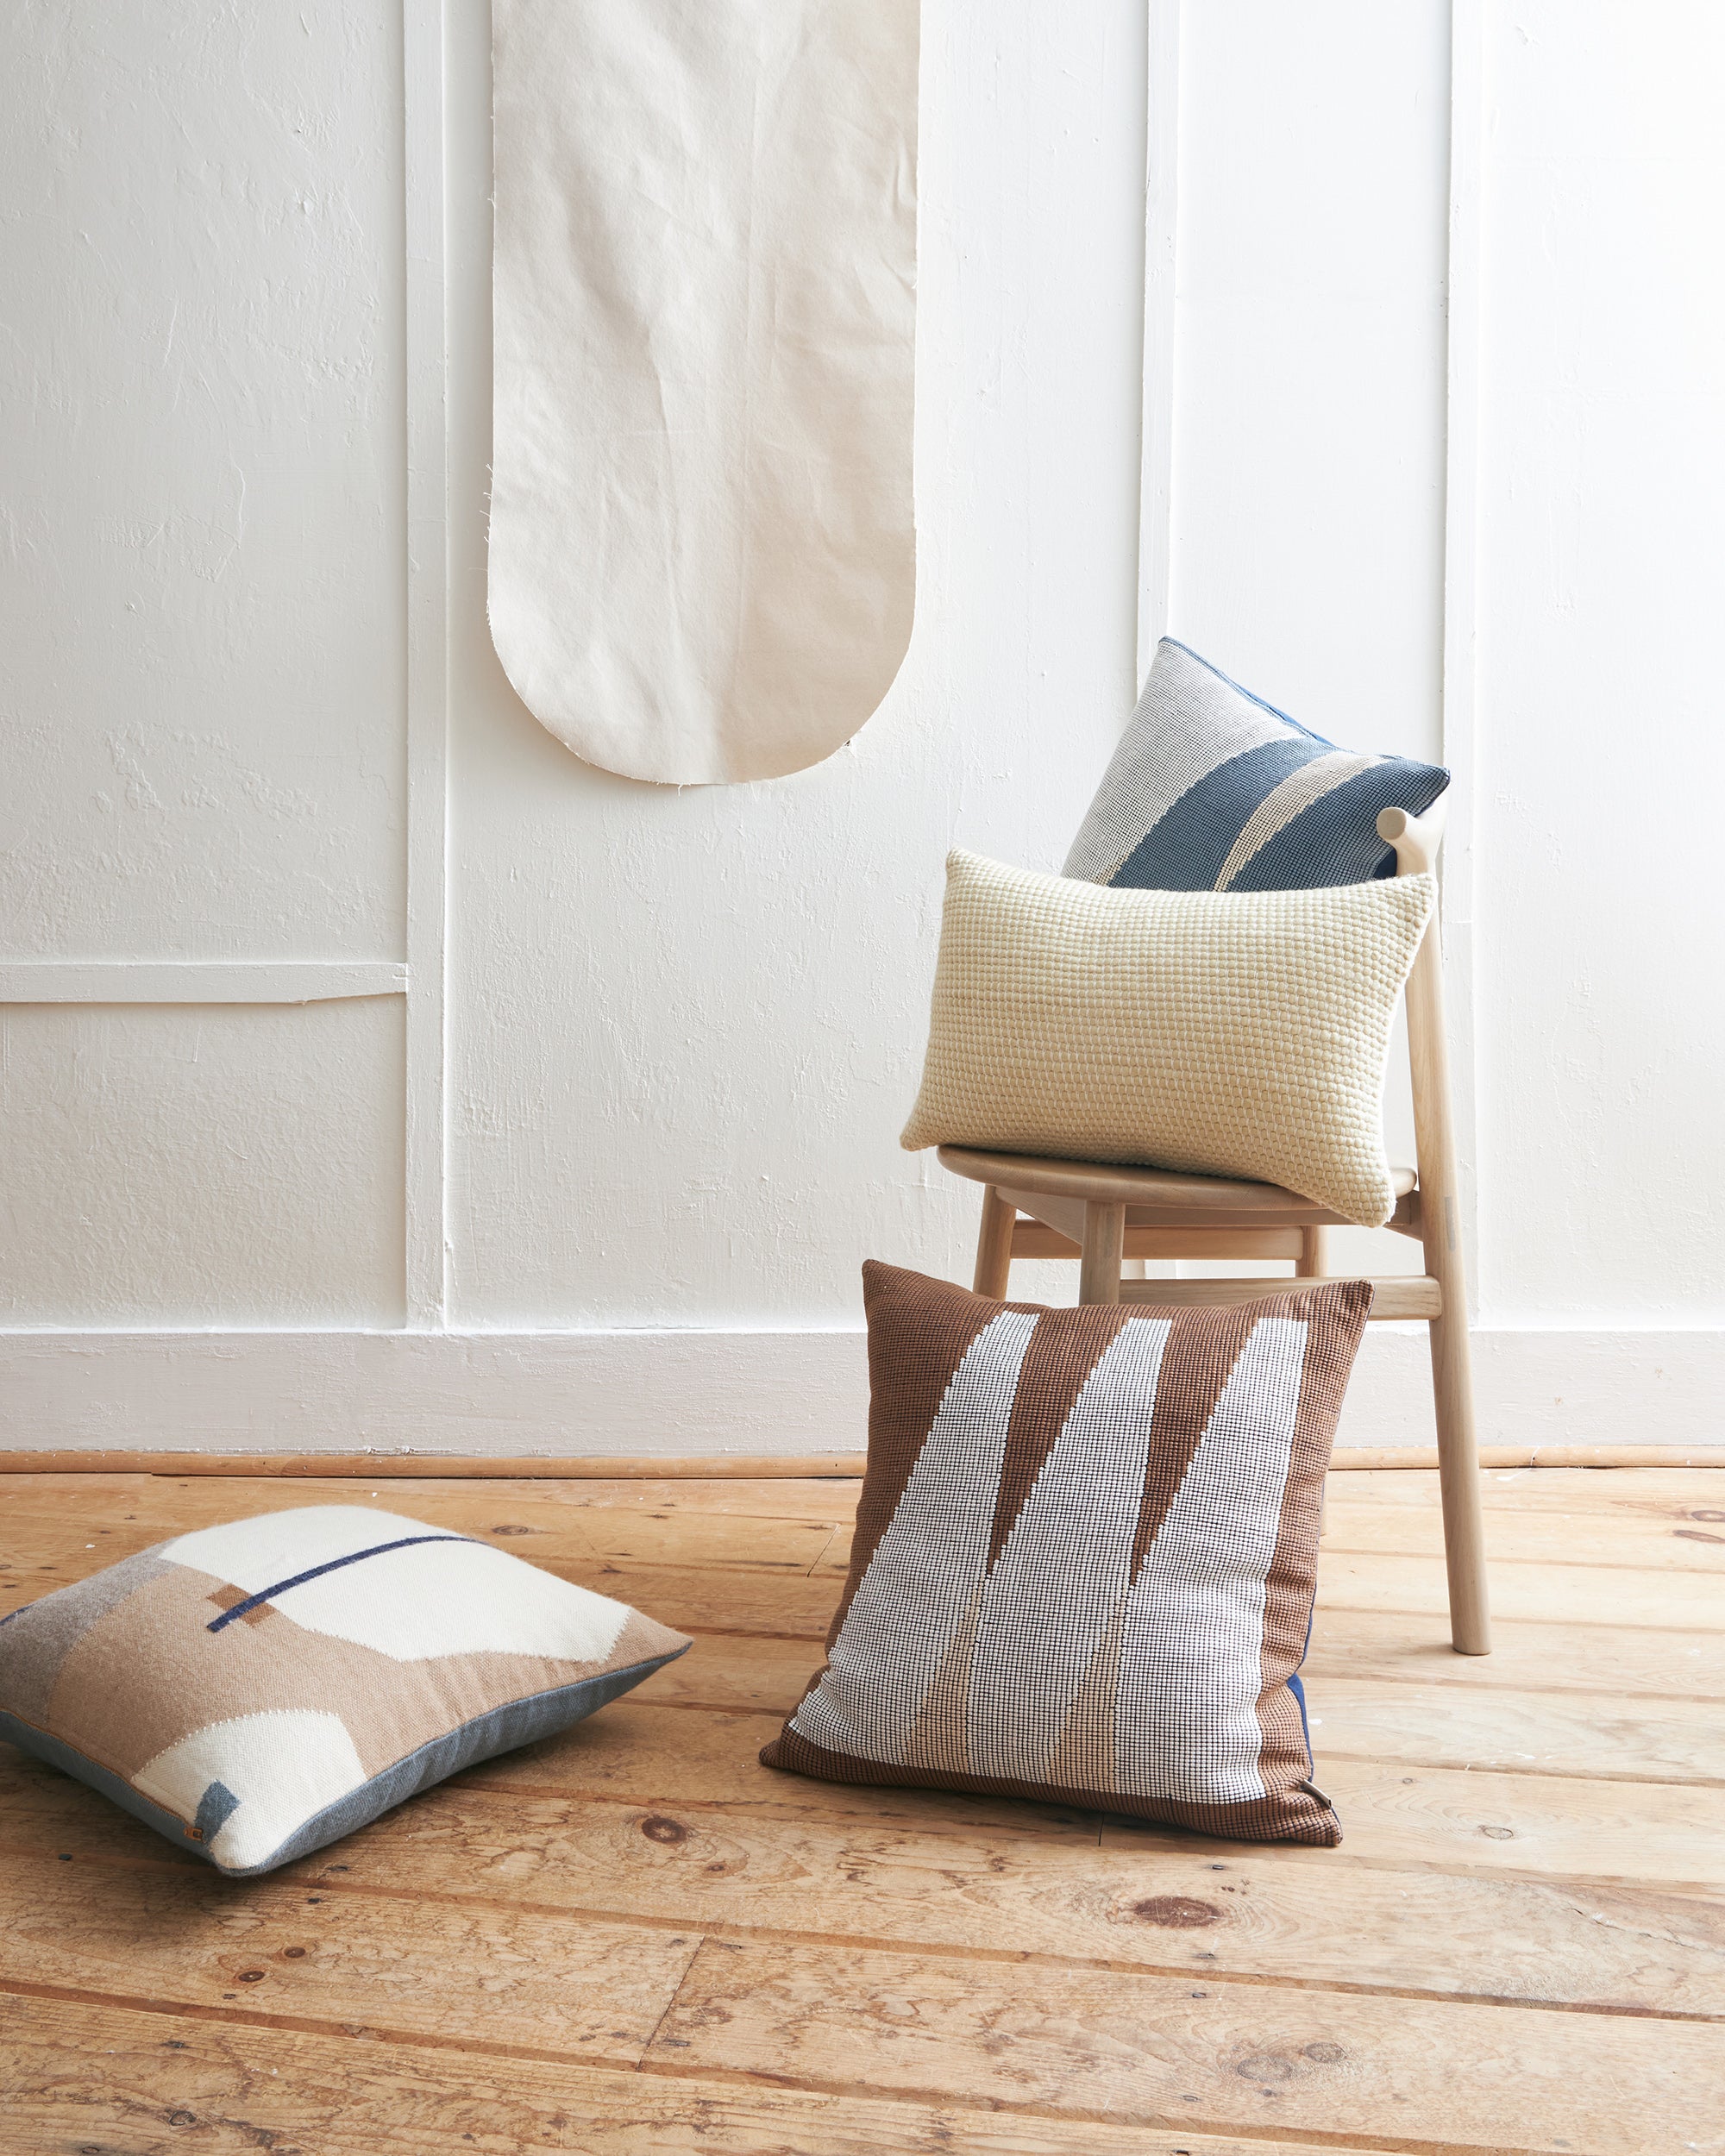 A minimal room with ethically handwoven decorative throw pillows designed by MINNA in cotton and alpaca.